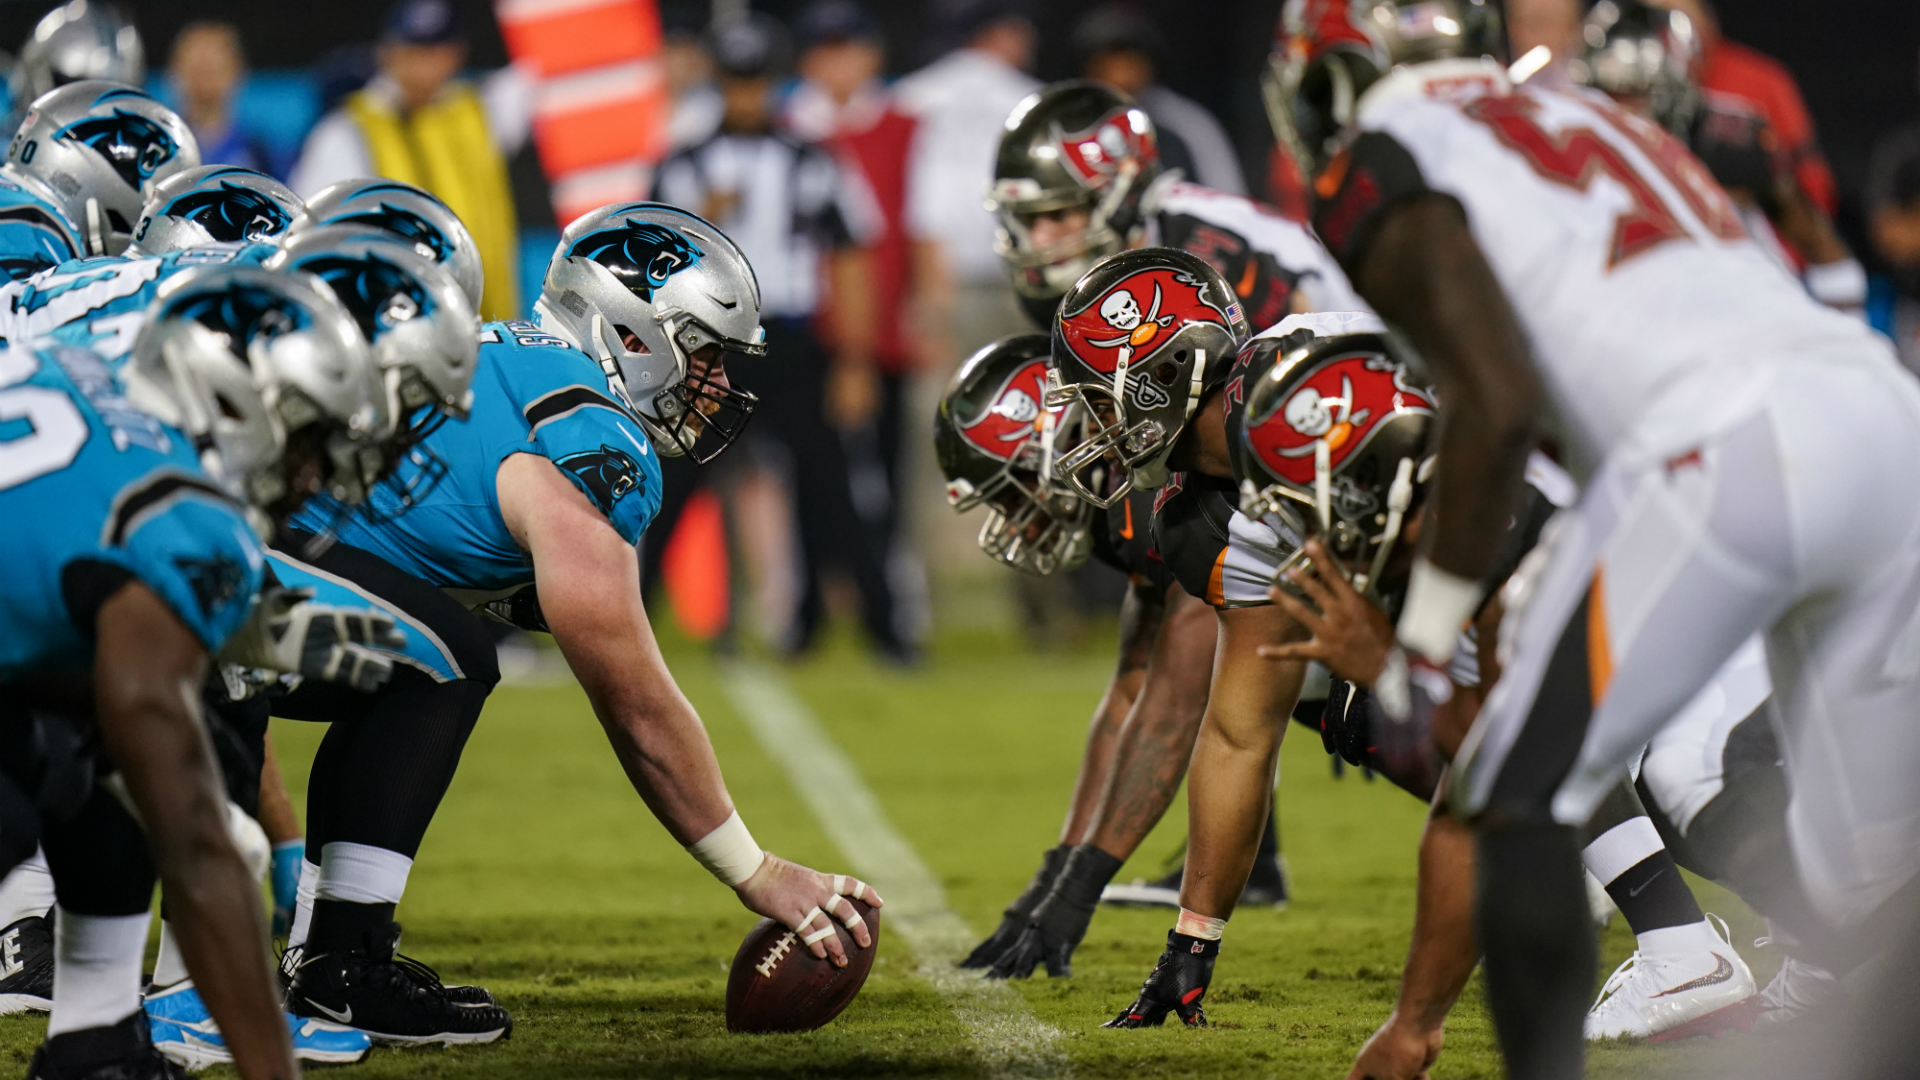 The Carolina Panthers come face to face with the Tampa Bay Buccaneers during an NFL game. Image courtesy of NFL UK and Dave Shopland.